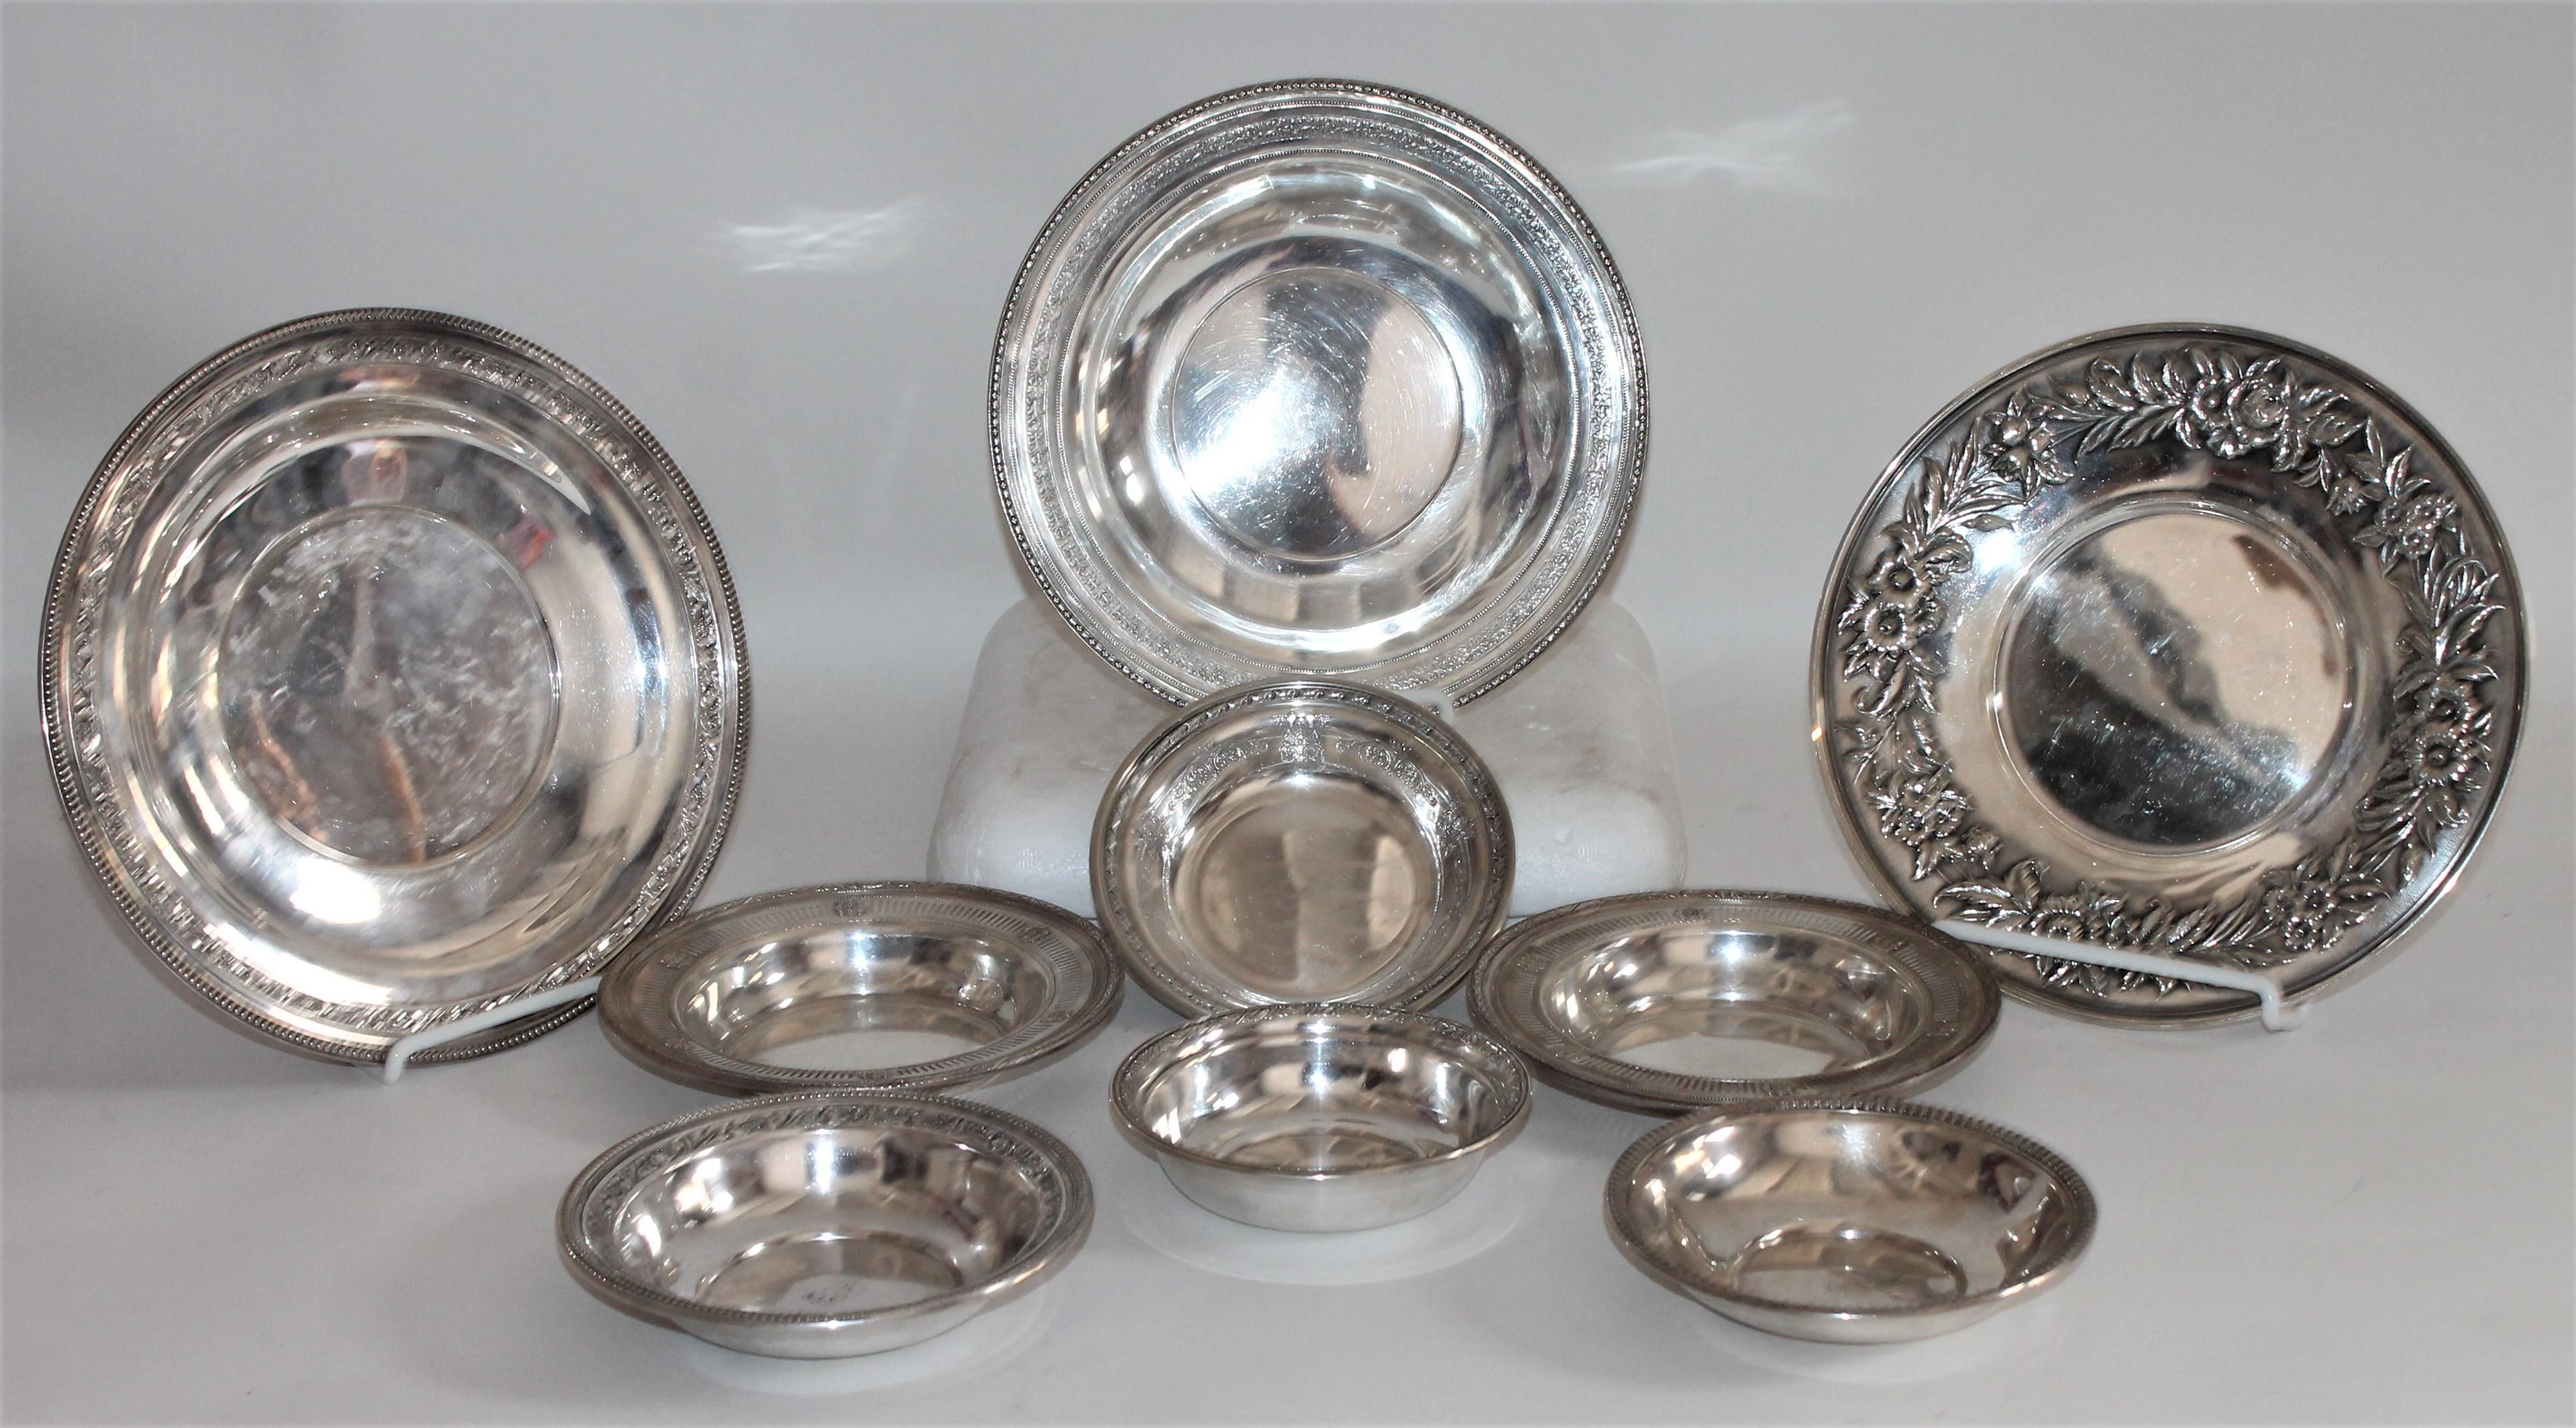 Collection of sterling silver bowls and serving dishes. A set of nine pieces in great condition. All are marked and stamped sterling. 

Measurements are as follows - 
For smaller bowls-
larger bowl- 6.75 x 1.5 
Medium bowls -6 x 1 , 6 x 1